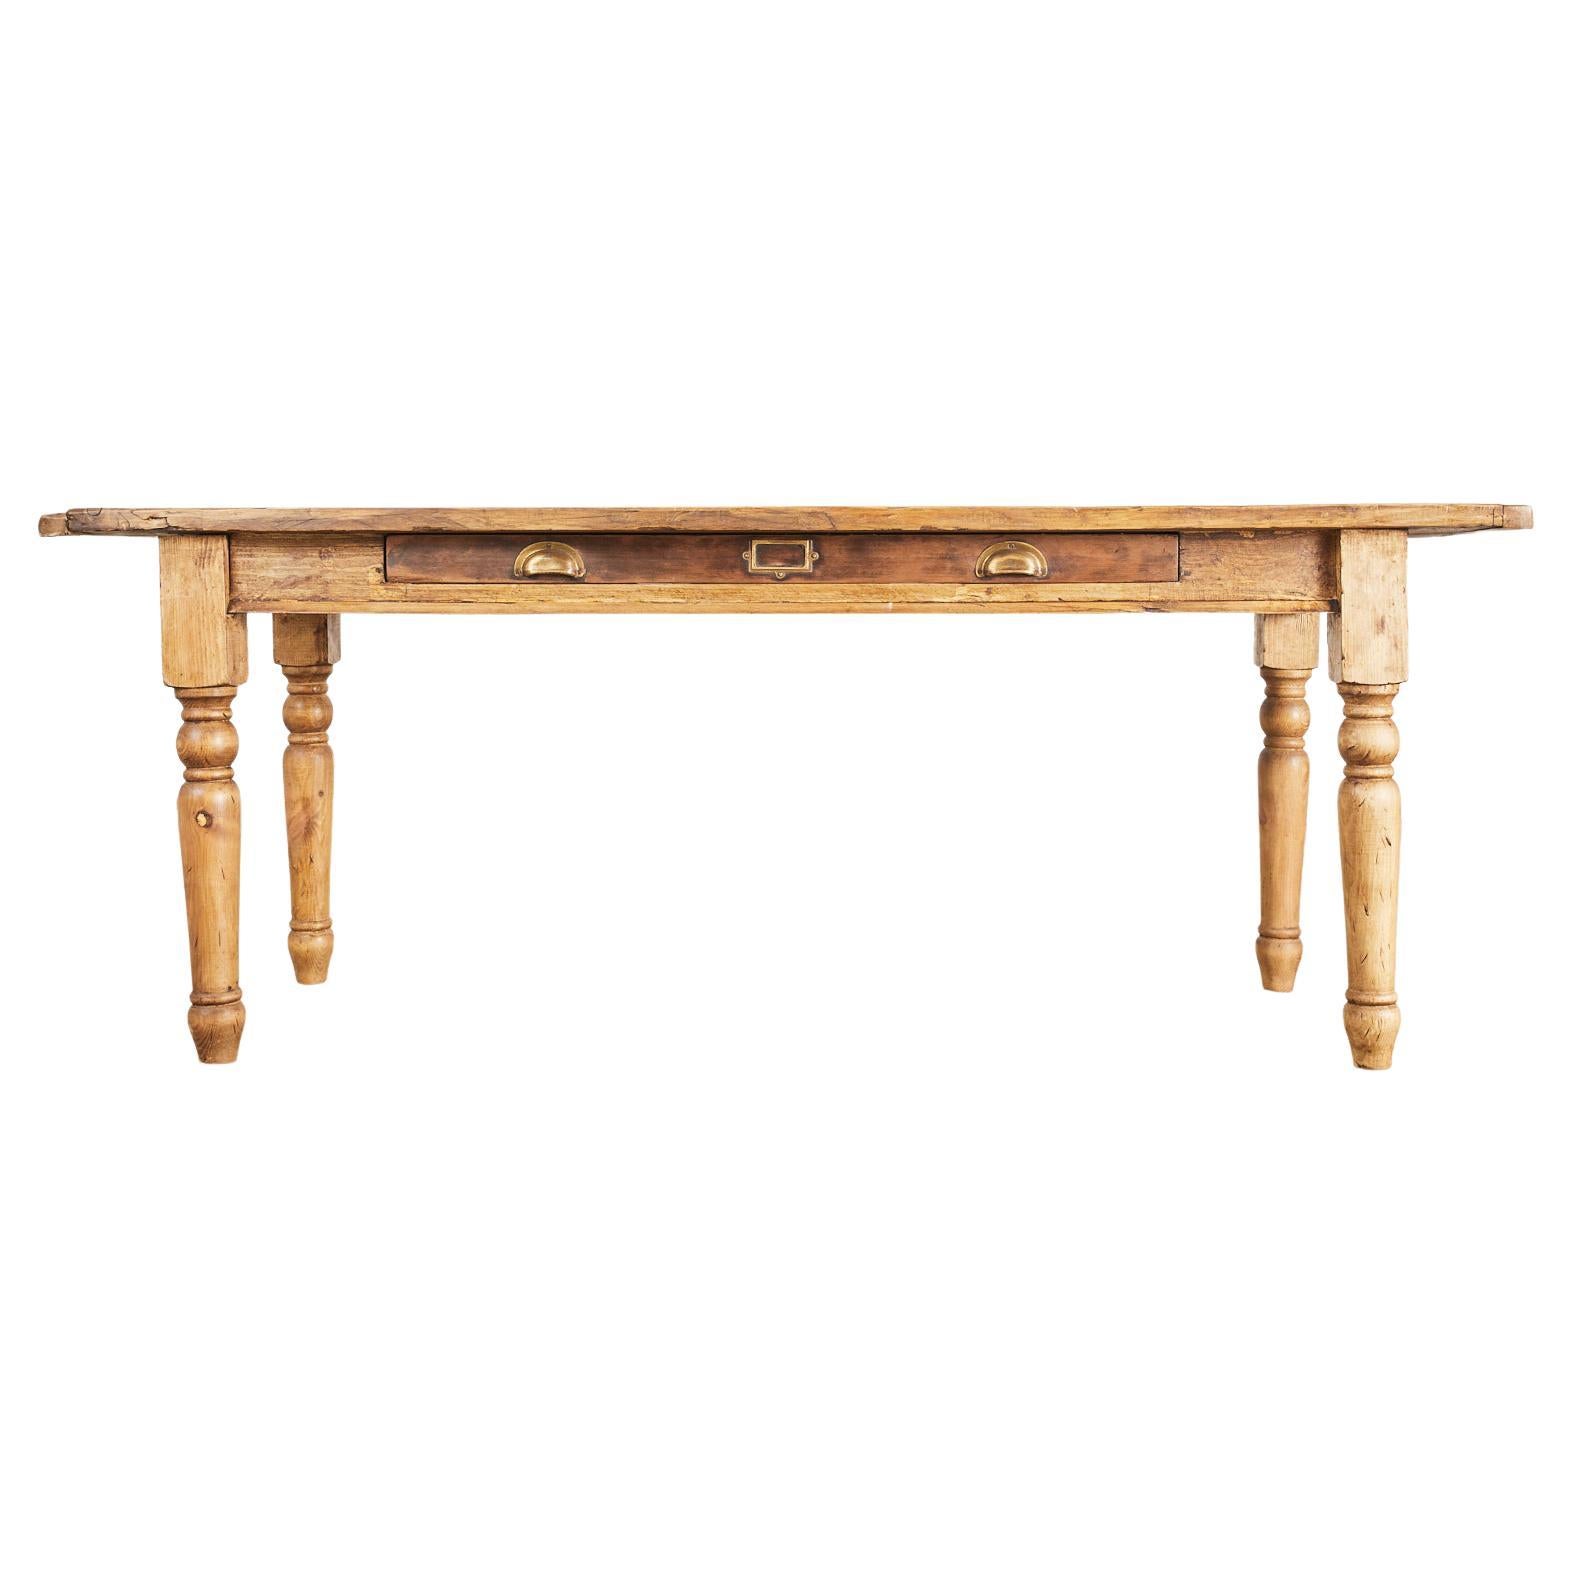 Country English Reclaimed Pine Farmhouse Dining Table or Console